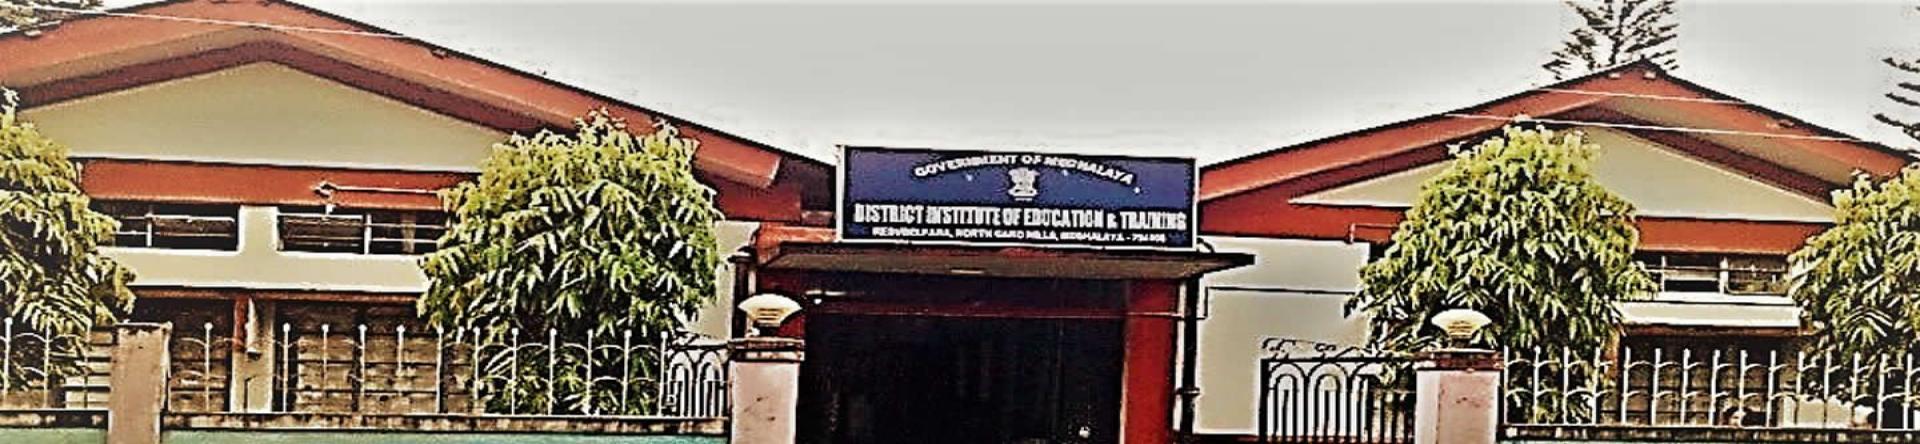 District Institute Of Education And Training  (DIET) Resubelpara